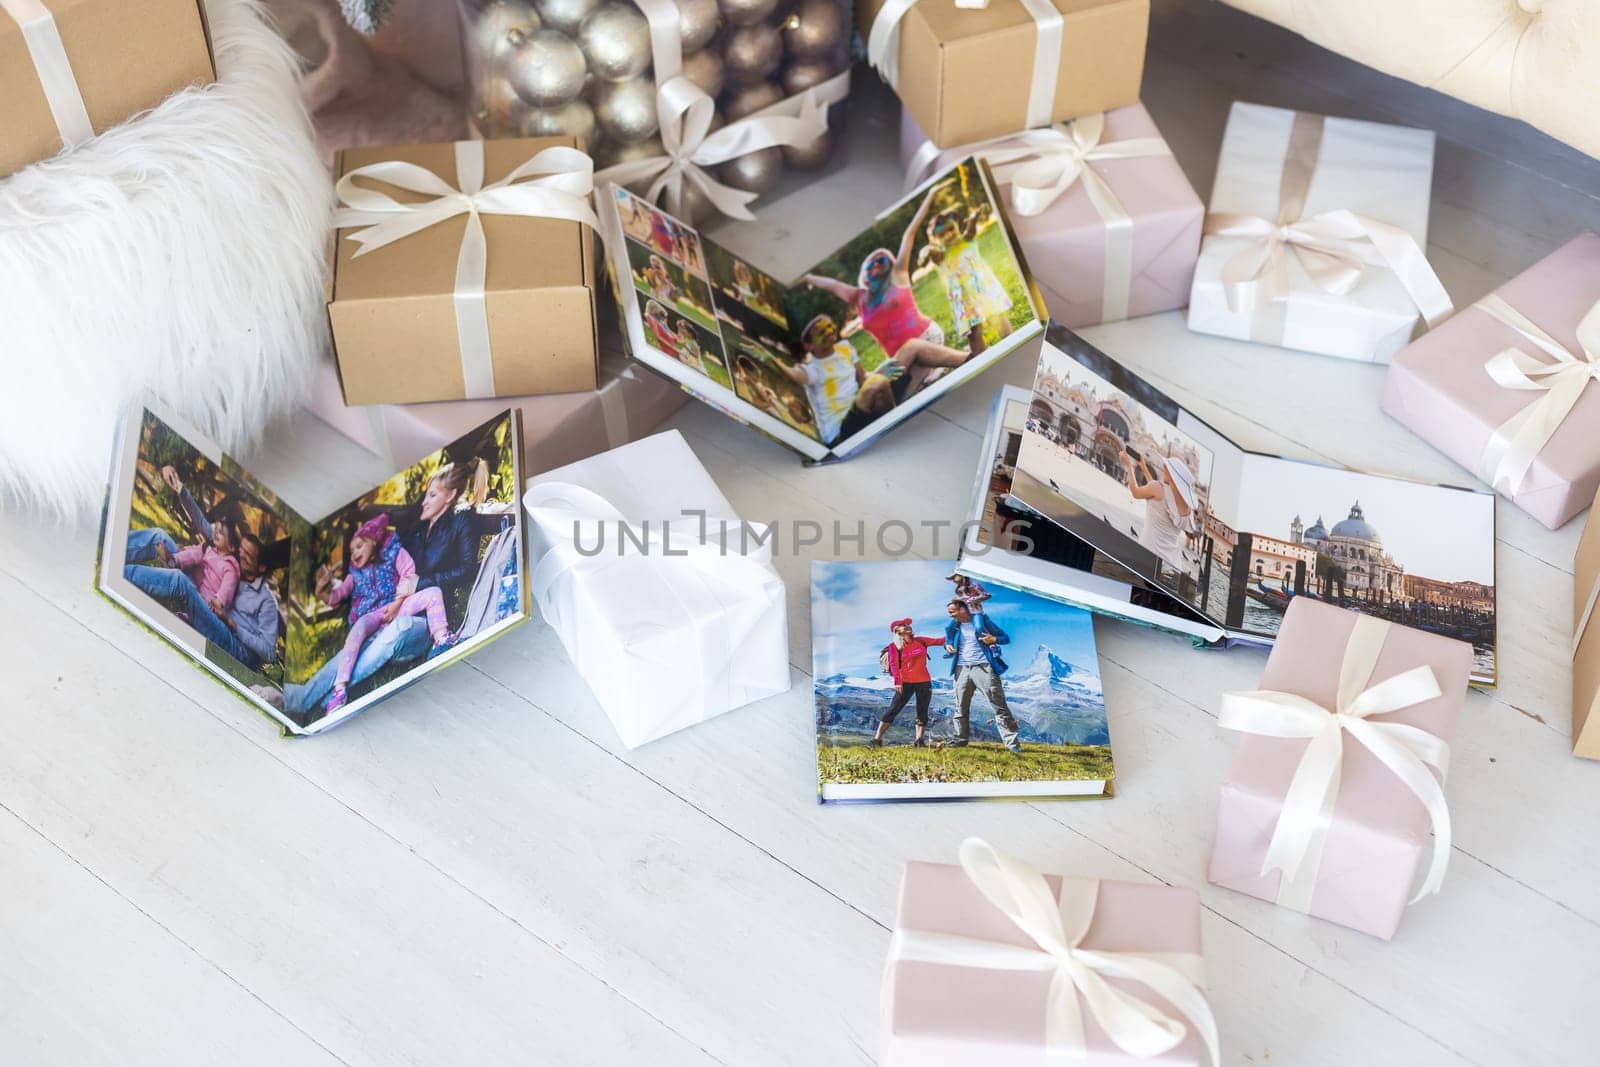 a Photobook of family.Photobook is gift. photo album next to gifts by Andelov13